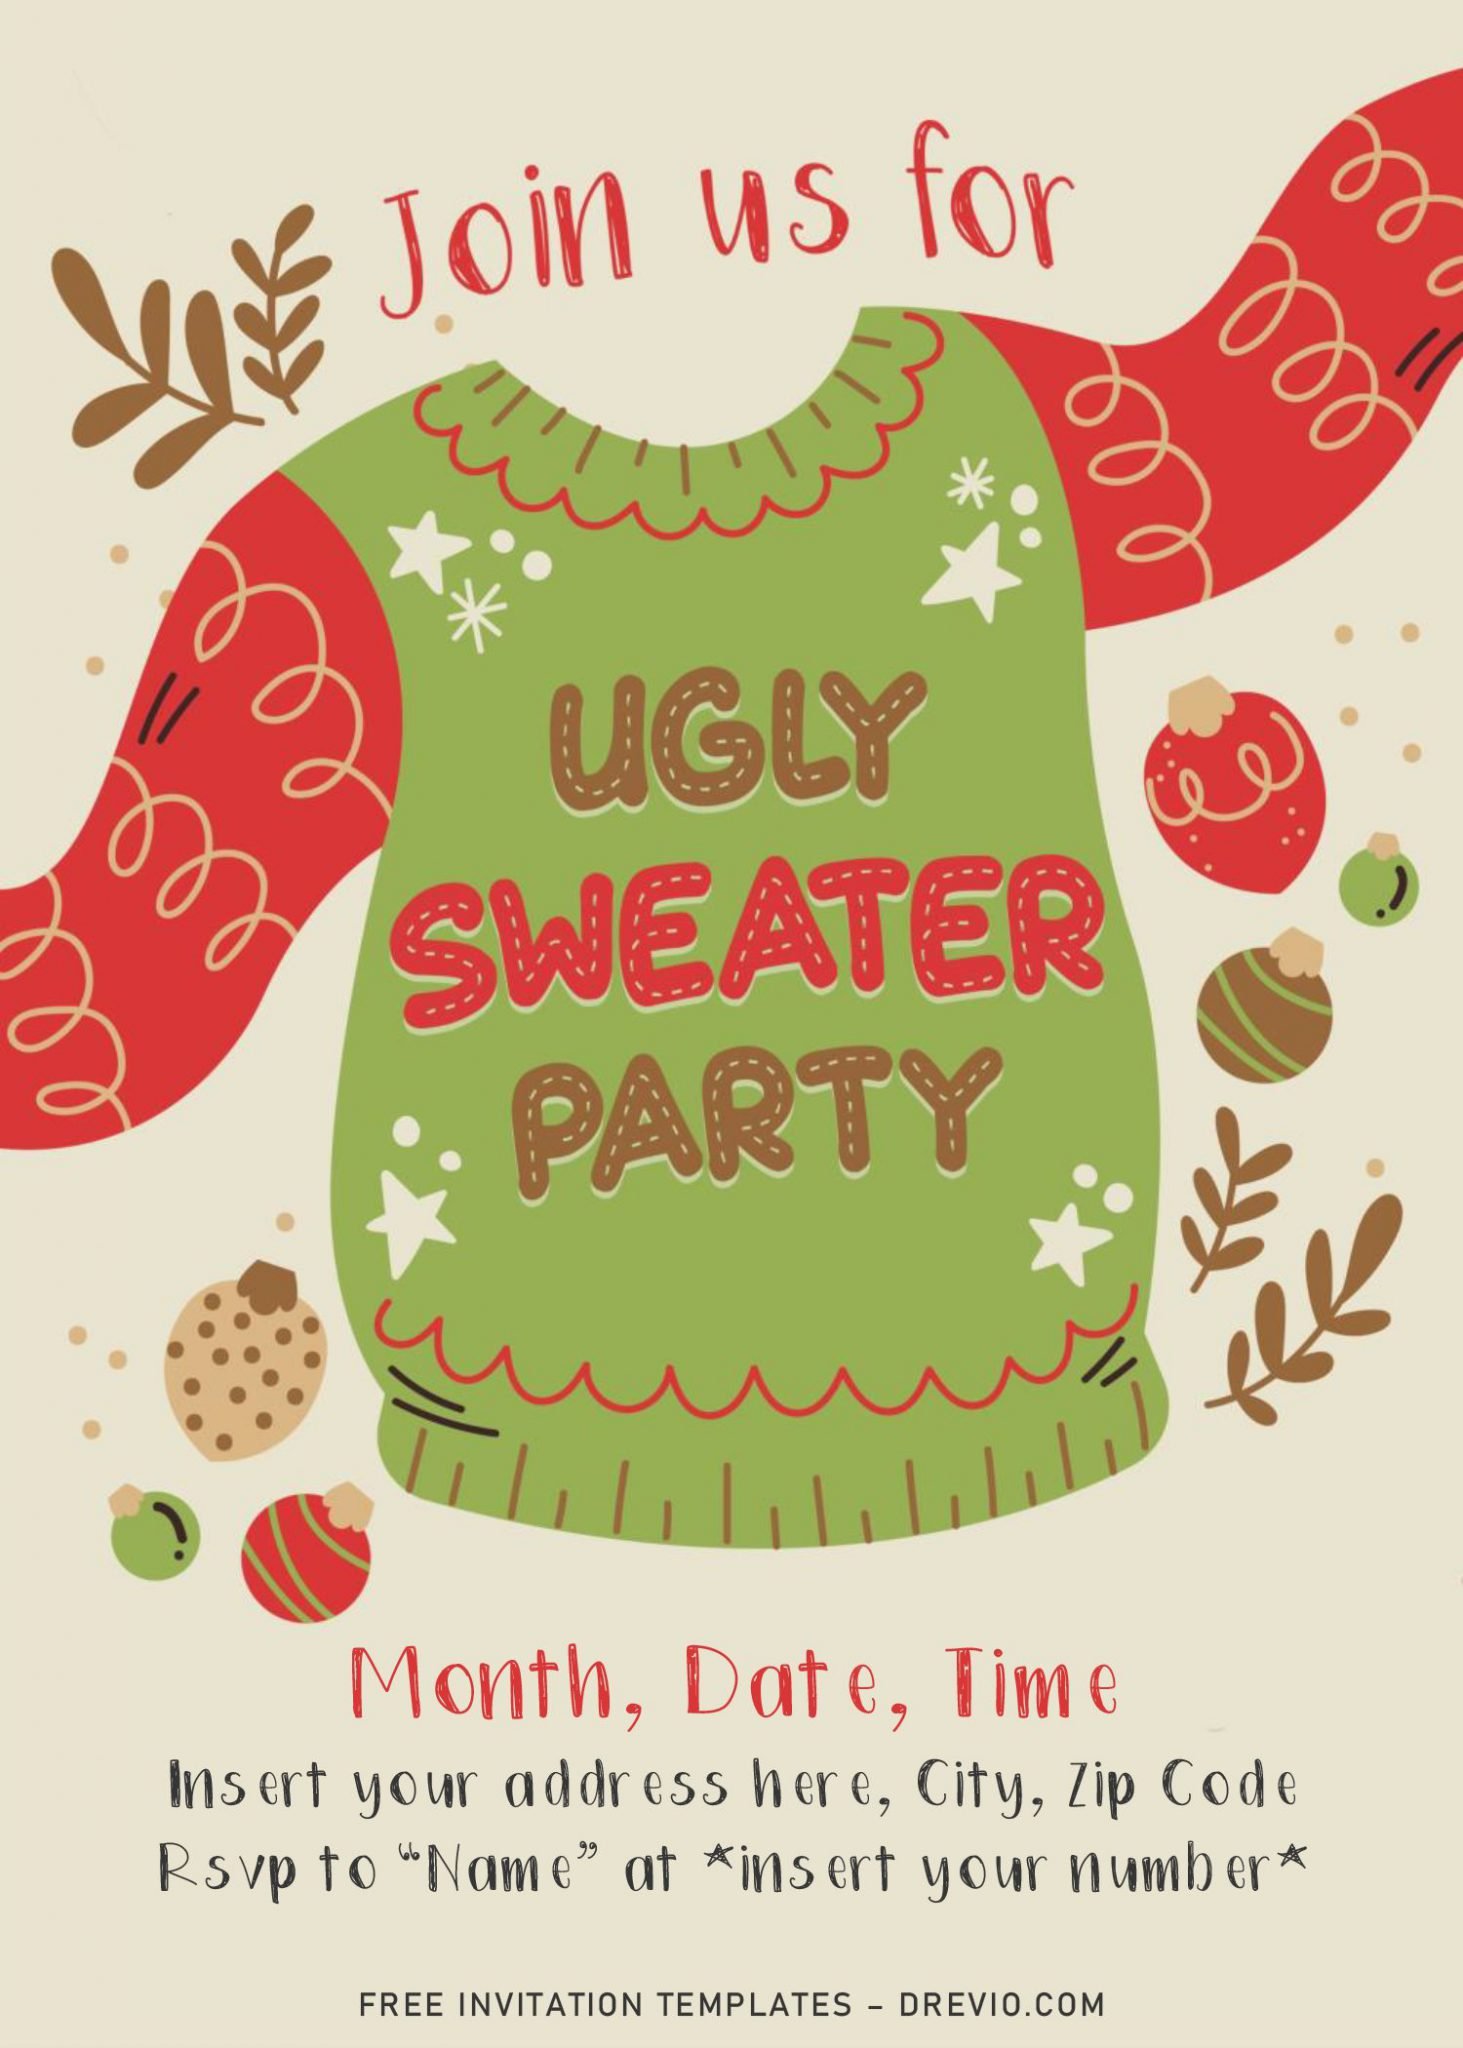 Free Ugly Sweater Party Invitation Printable